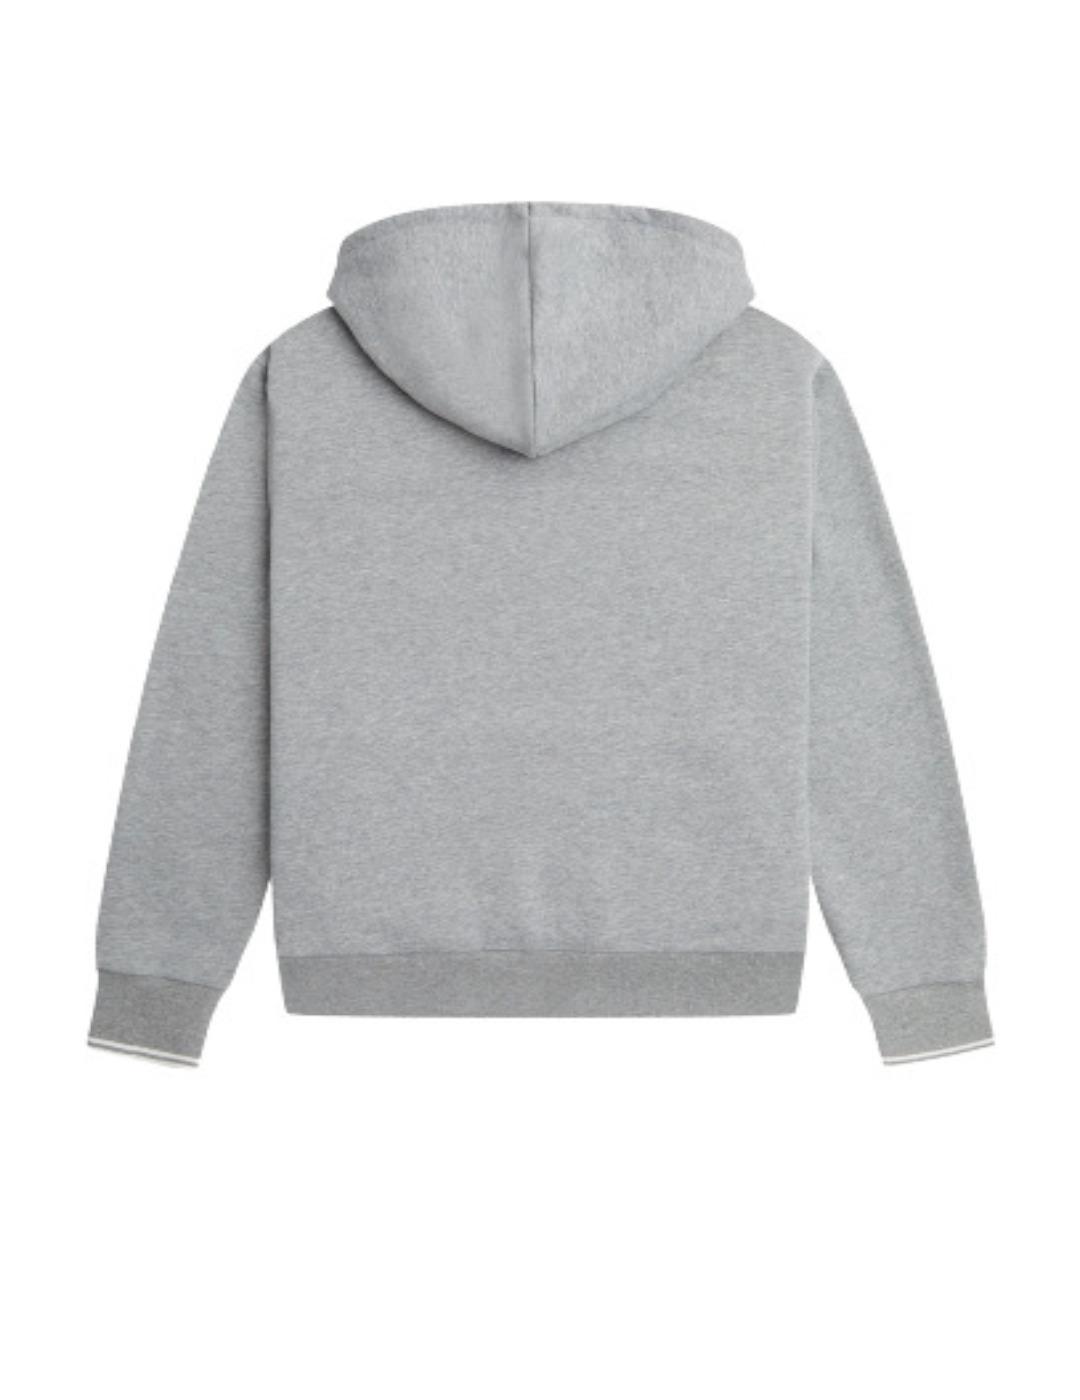 Sudadera Fred Perry gris con capucha